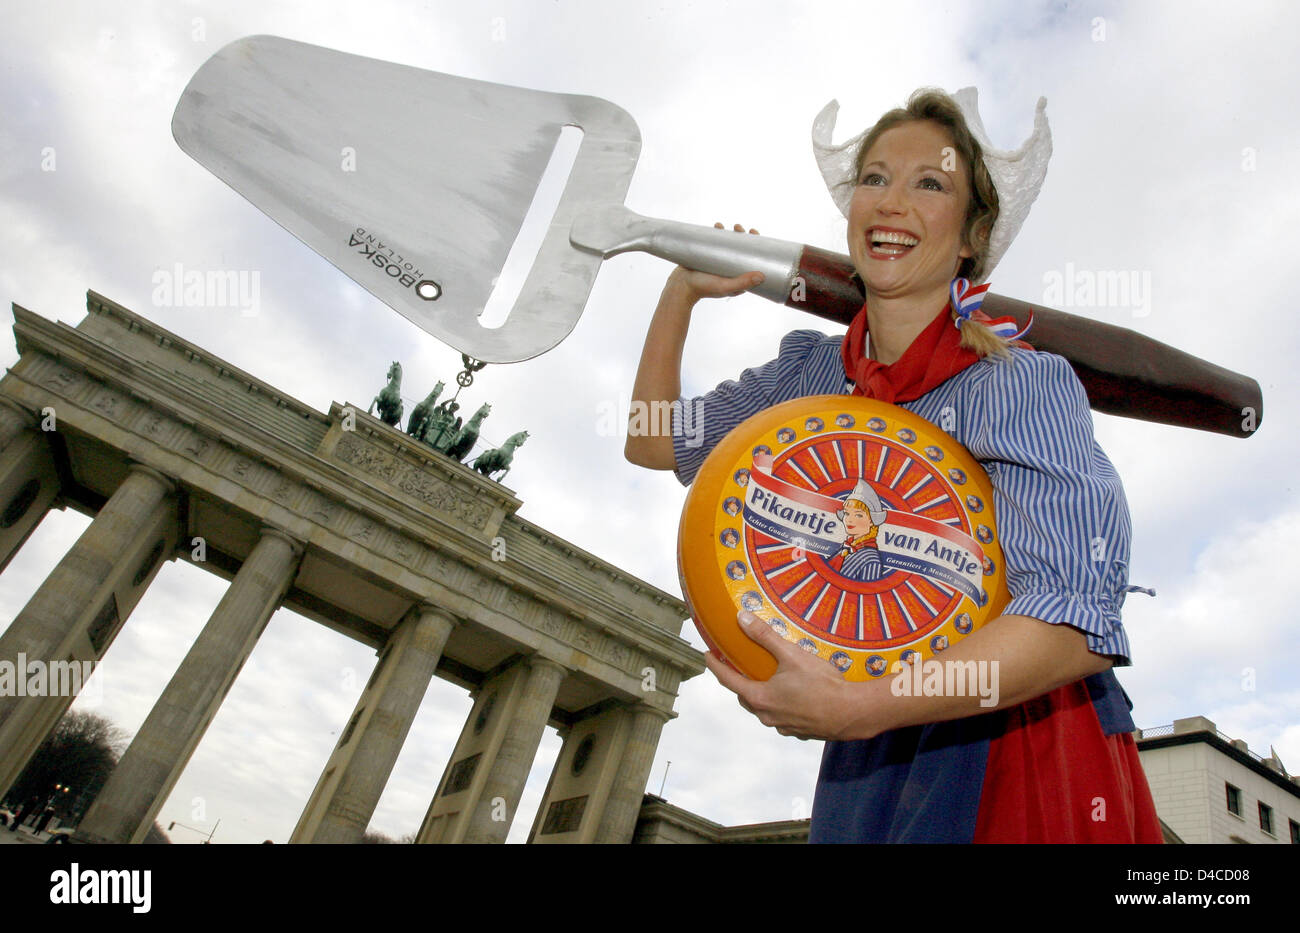 Frau Antje mascot of the Dutch dairy association carries gouda cheese  and a cheese slicer in front of the Brandenburg Gate, in Berlin, Germany, 17 January 2008. The world's largest exhibition for the food industry, agriculture and horticulture 'International Green Week' 2008 will take  place from 18 to 28 January 2008. Photo: WOLFGANG KUMM Stock Photo